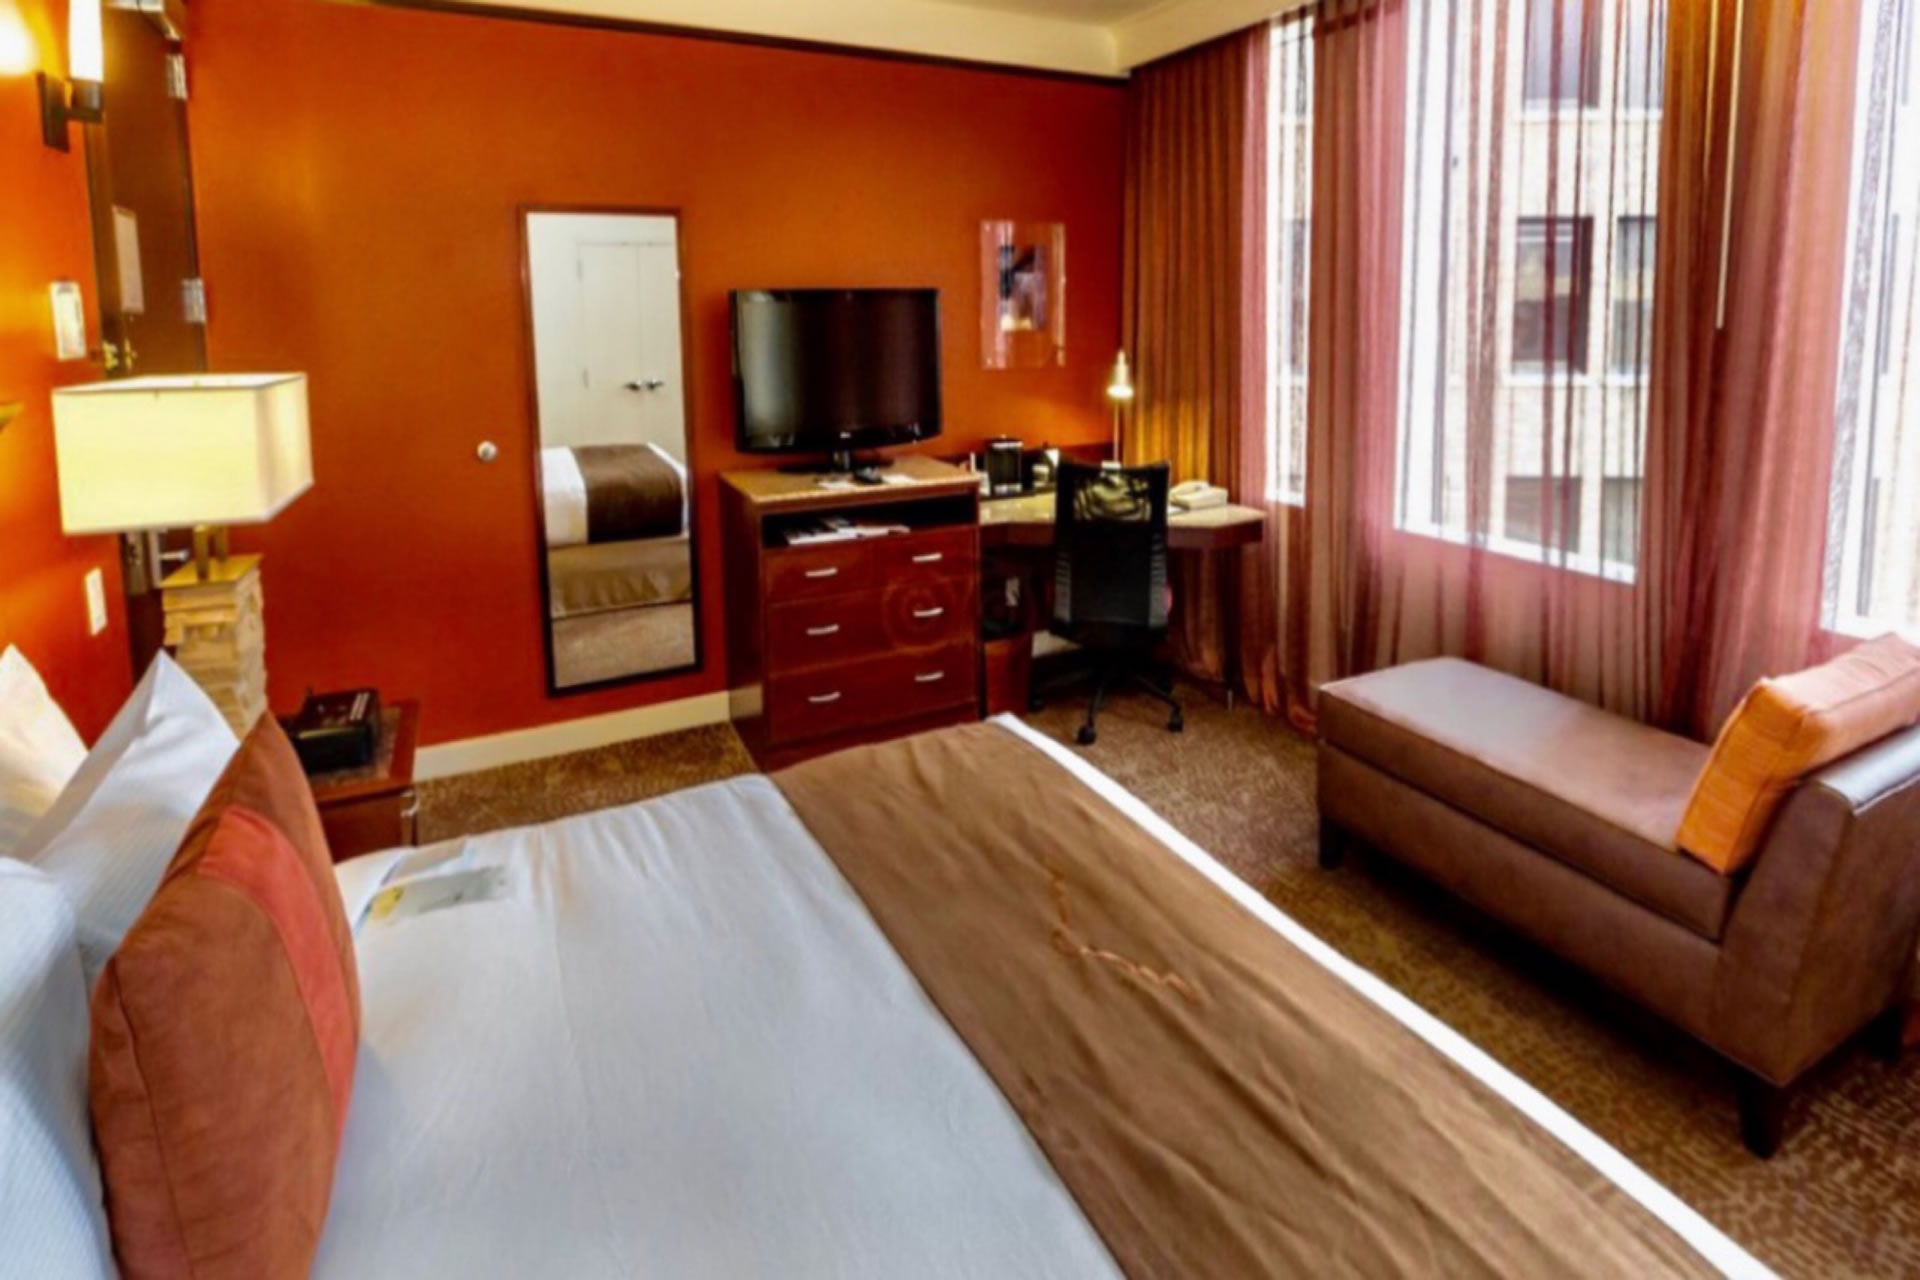 Guestroom at the Emily Morgan Hotel featuring a king bed, work desk, and chaise lounge chair.